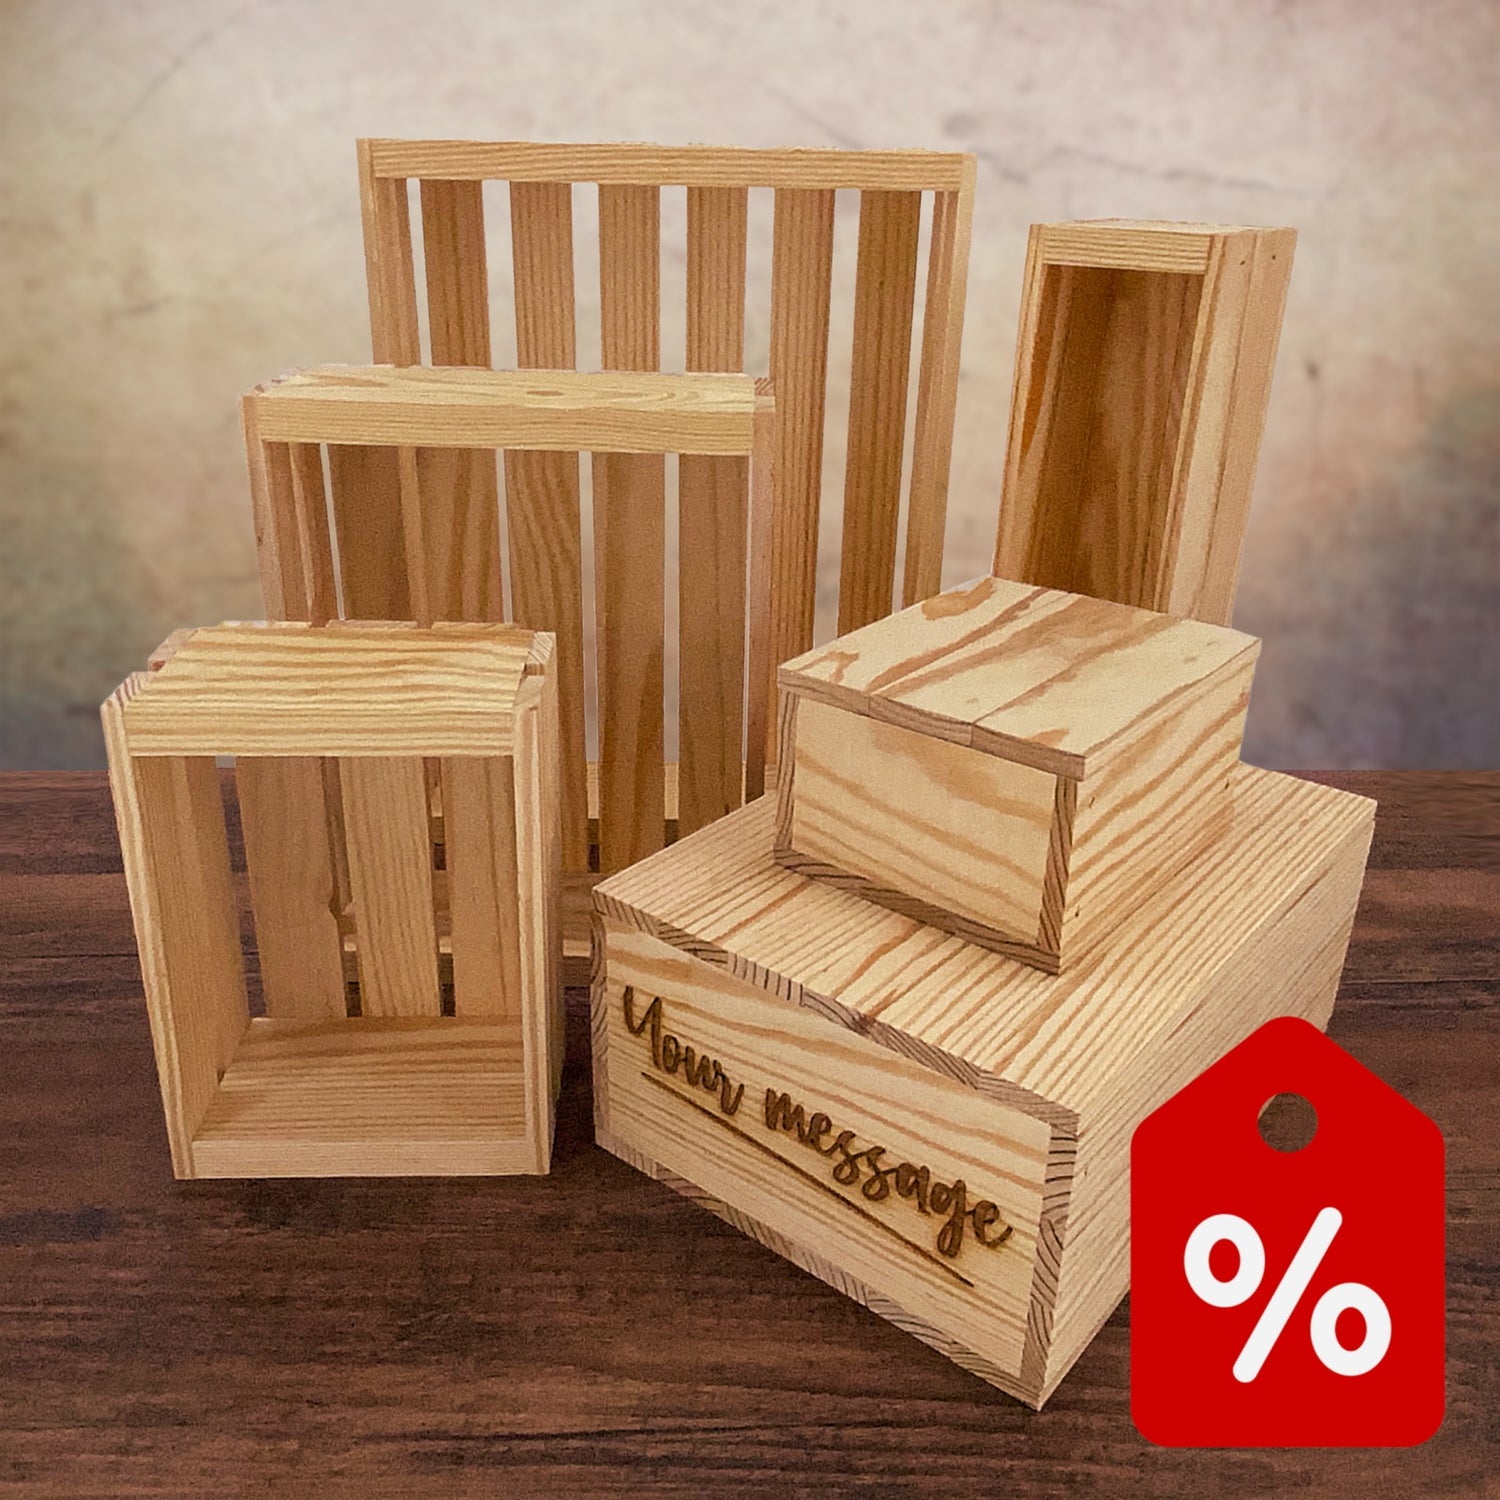 Specials on crates by Carpenter Core